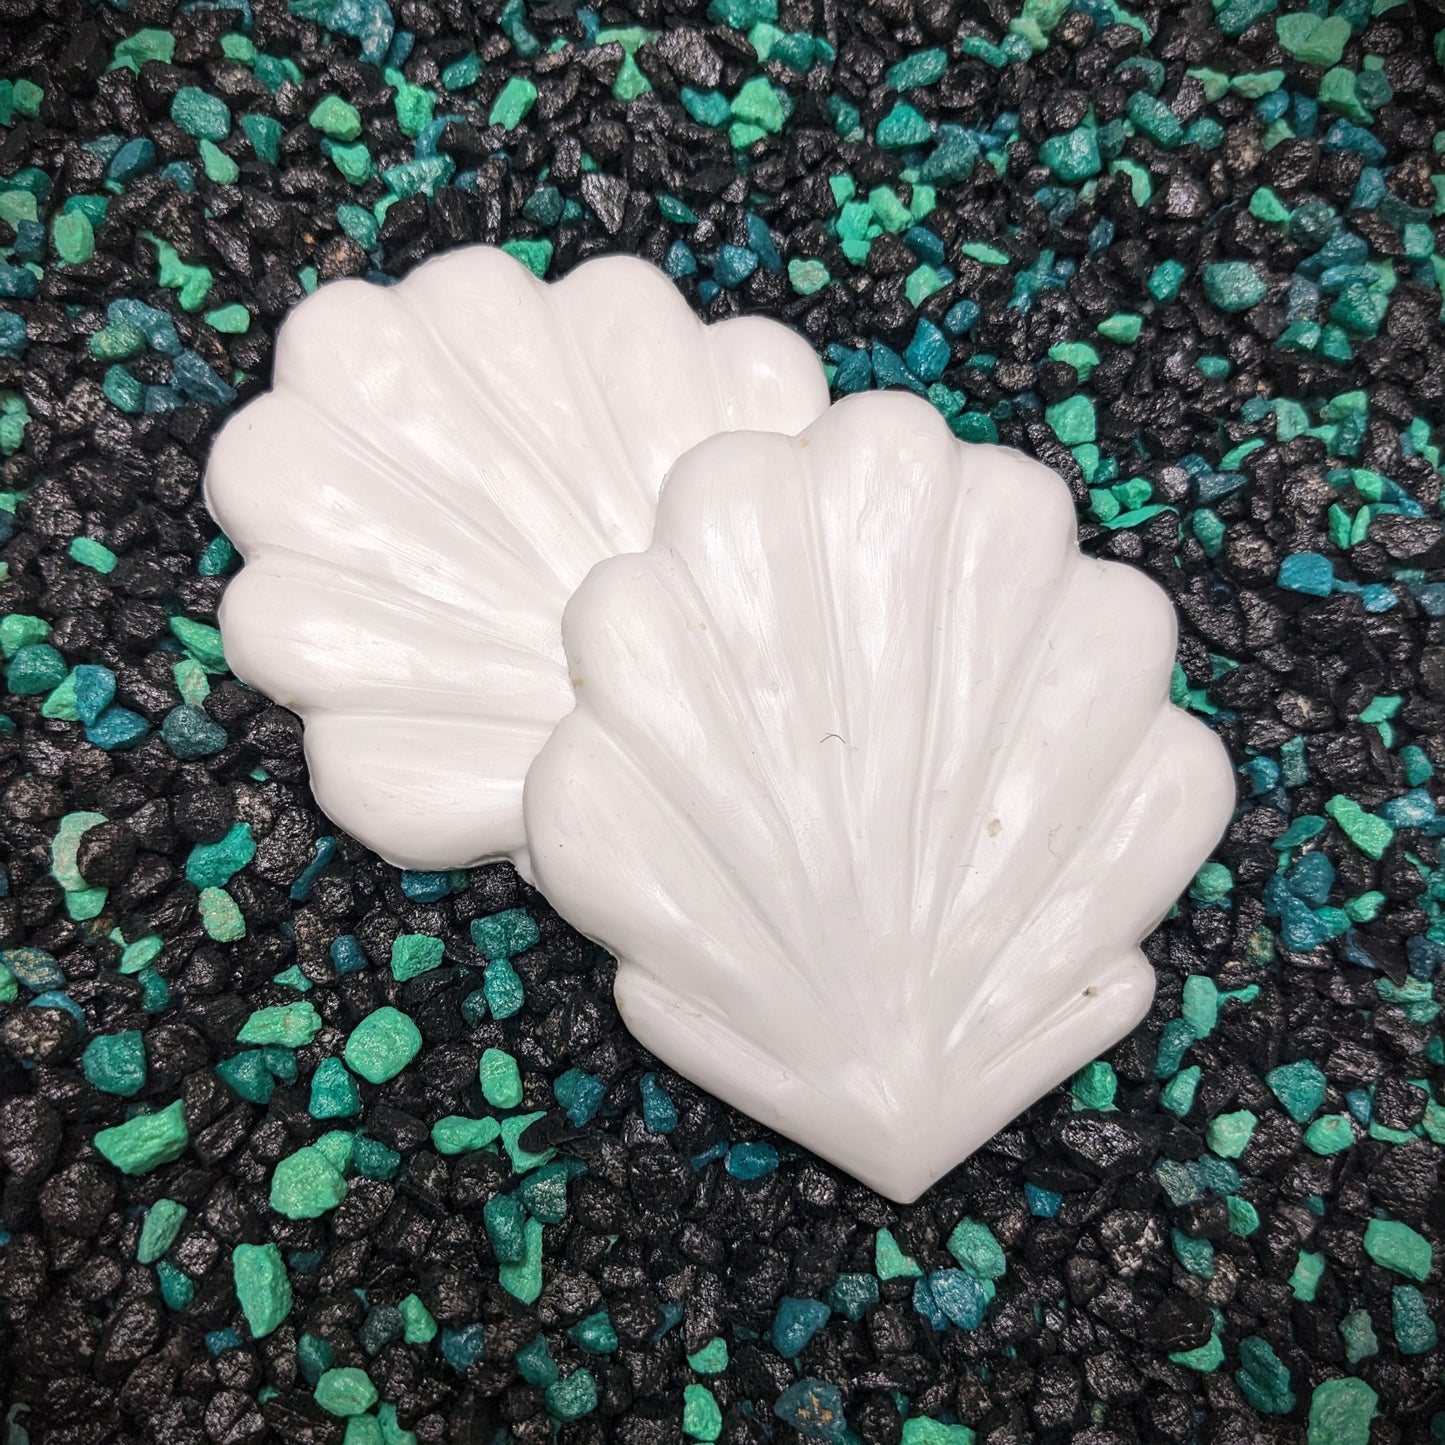 Blank plastic shell seashell set from IDfabrications ID Fabrications for cosplay crafting mermaid tops and merfolk accessories Bubble Clam Shell Set